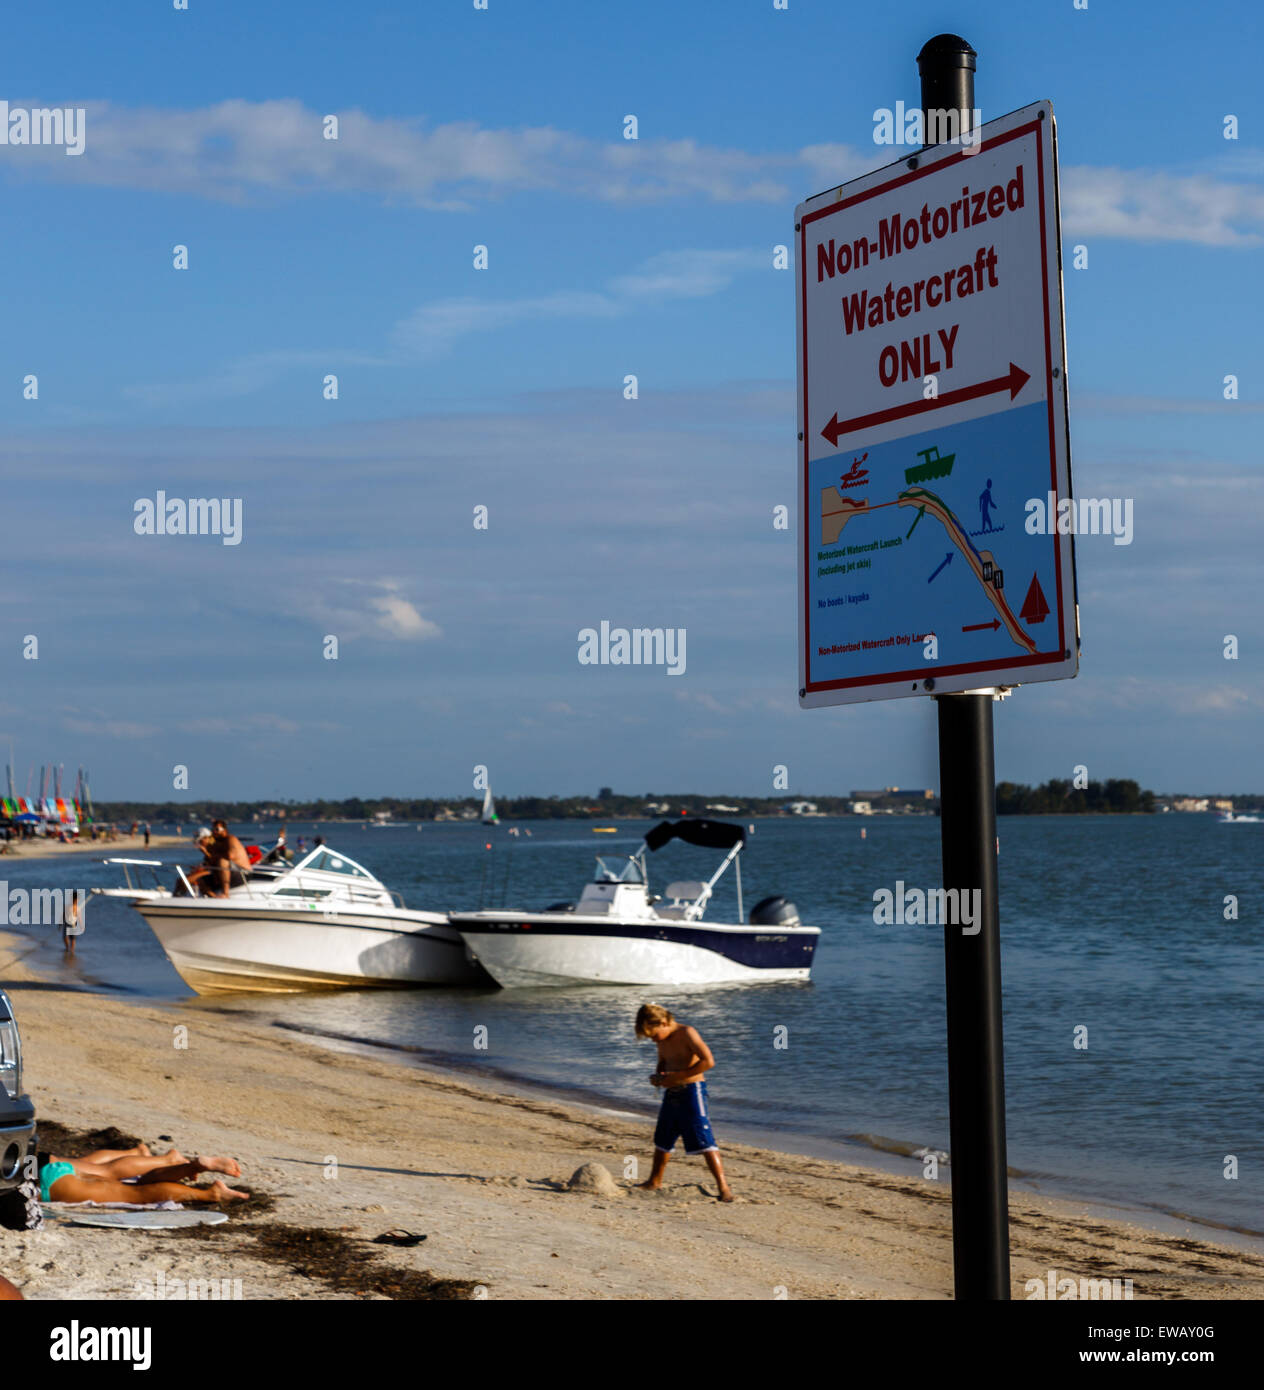 Motor boat owners ignoring Non-motorized watercraft only sign Stock Photo